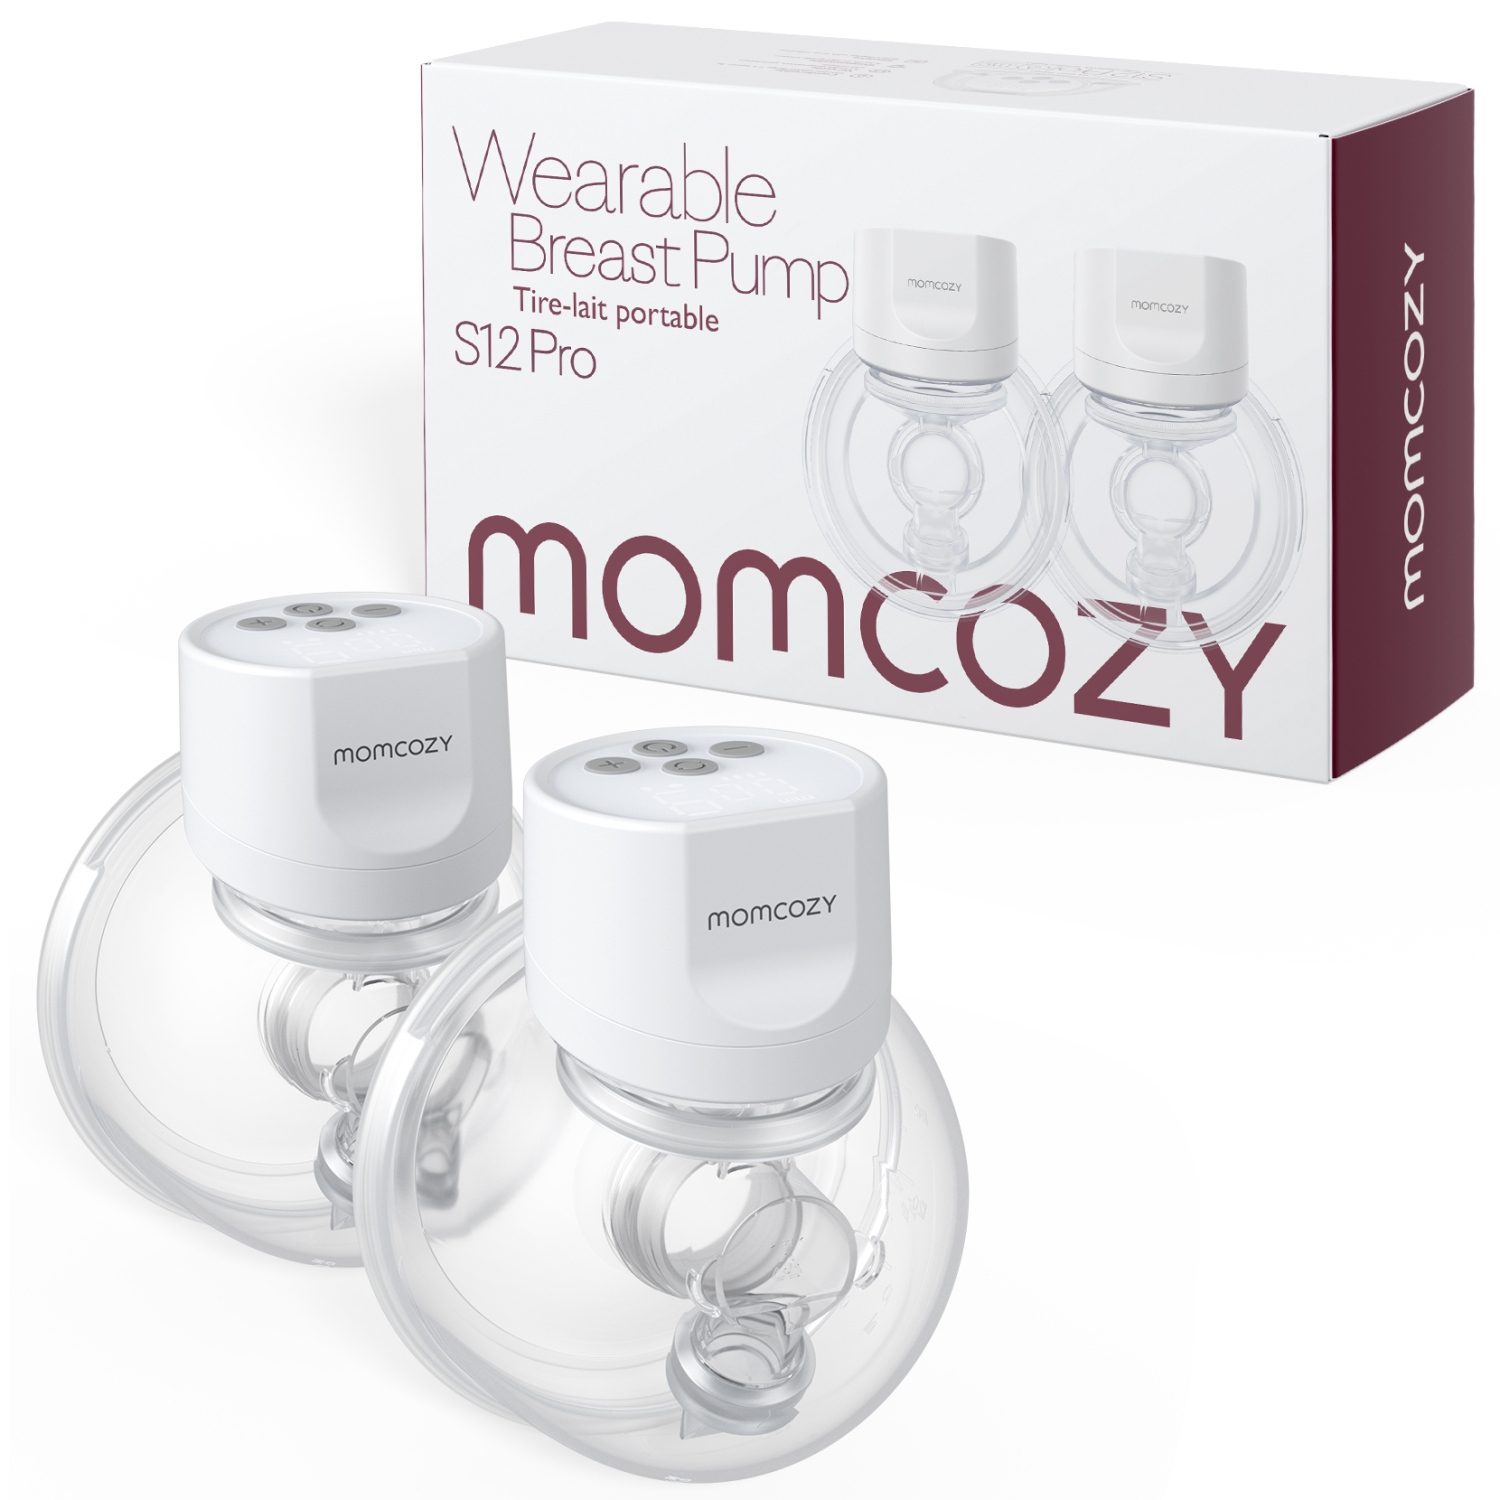 Momcozy Electric Wearable Breast Pump M1,Portable, All in 1 with 3 Modes